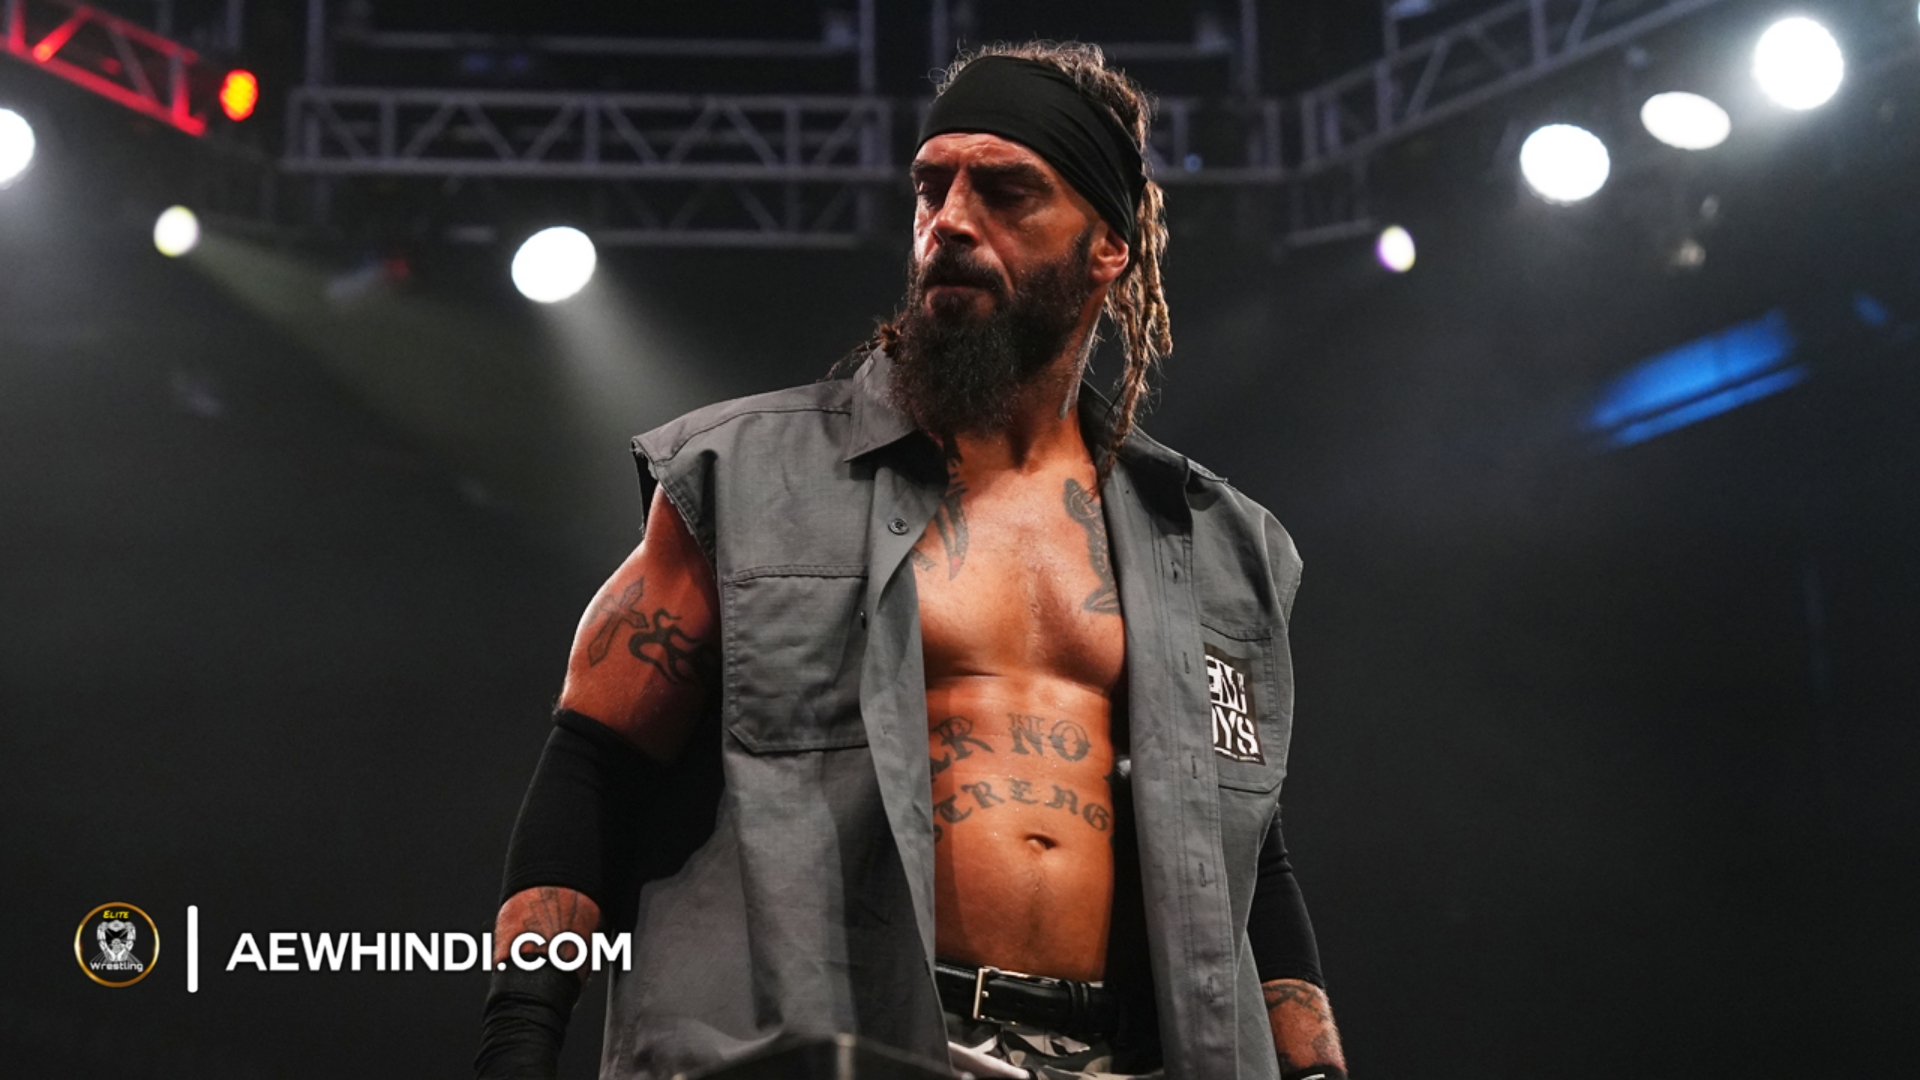 Jay Briscoe, One half of The Briscoes died at the age of 38